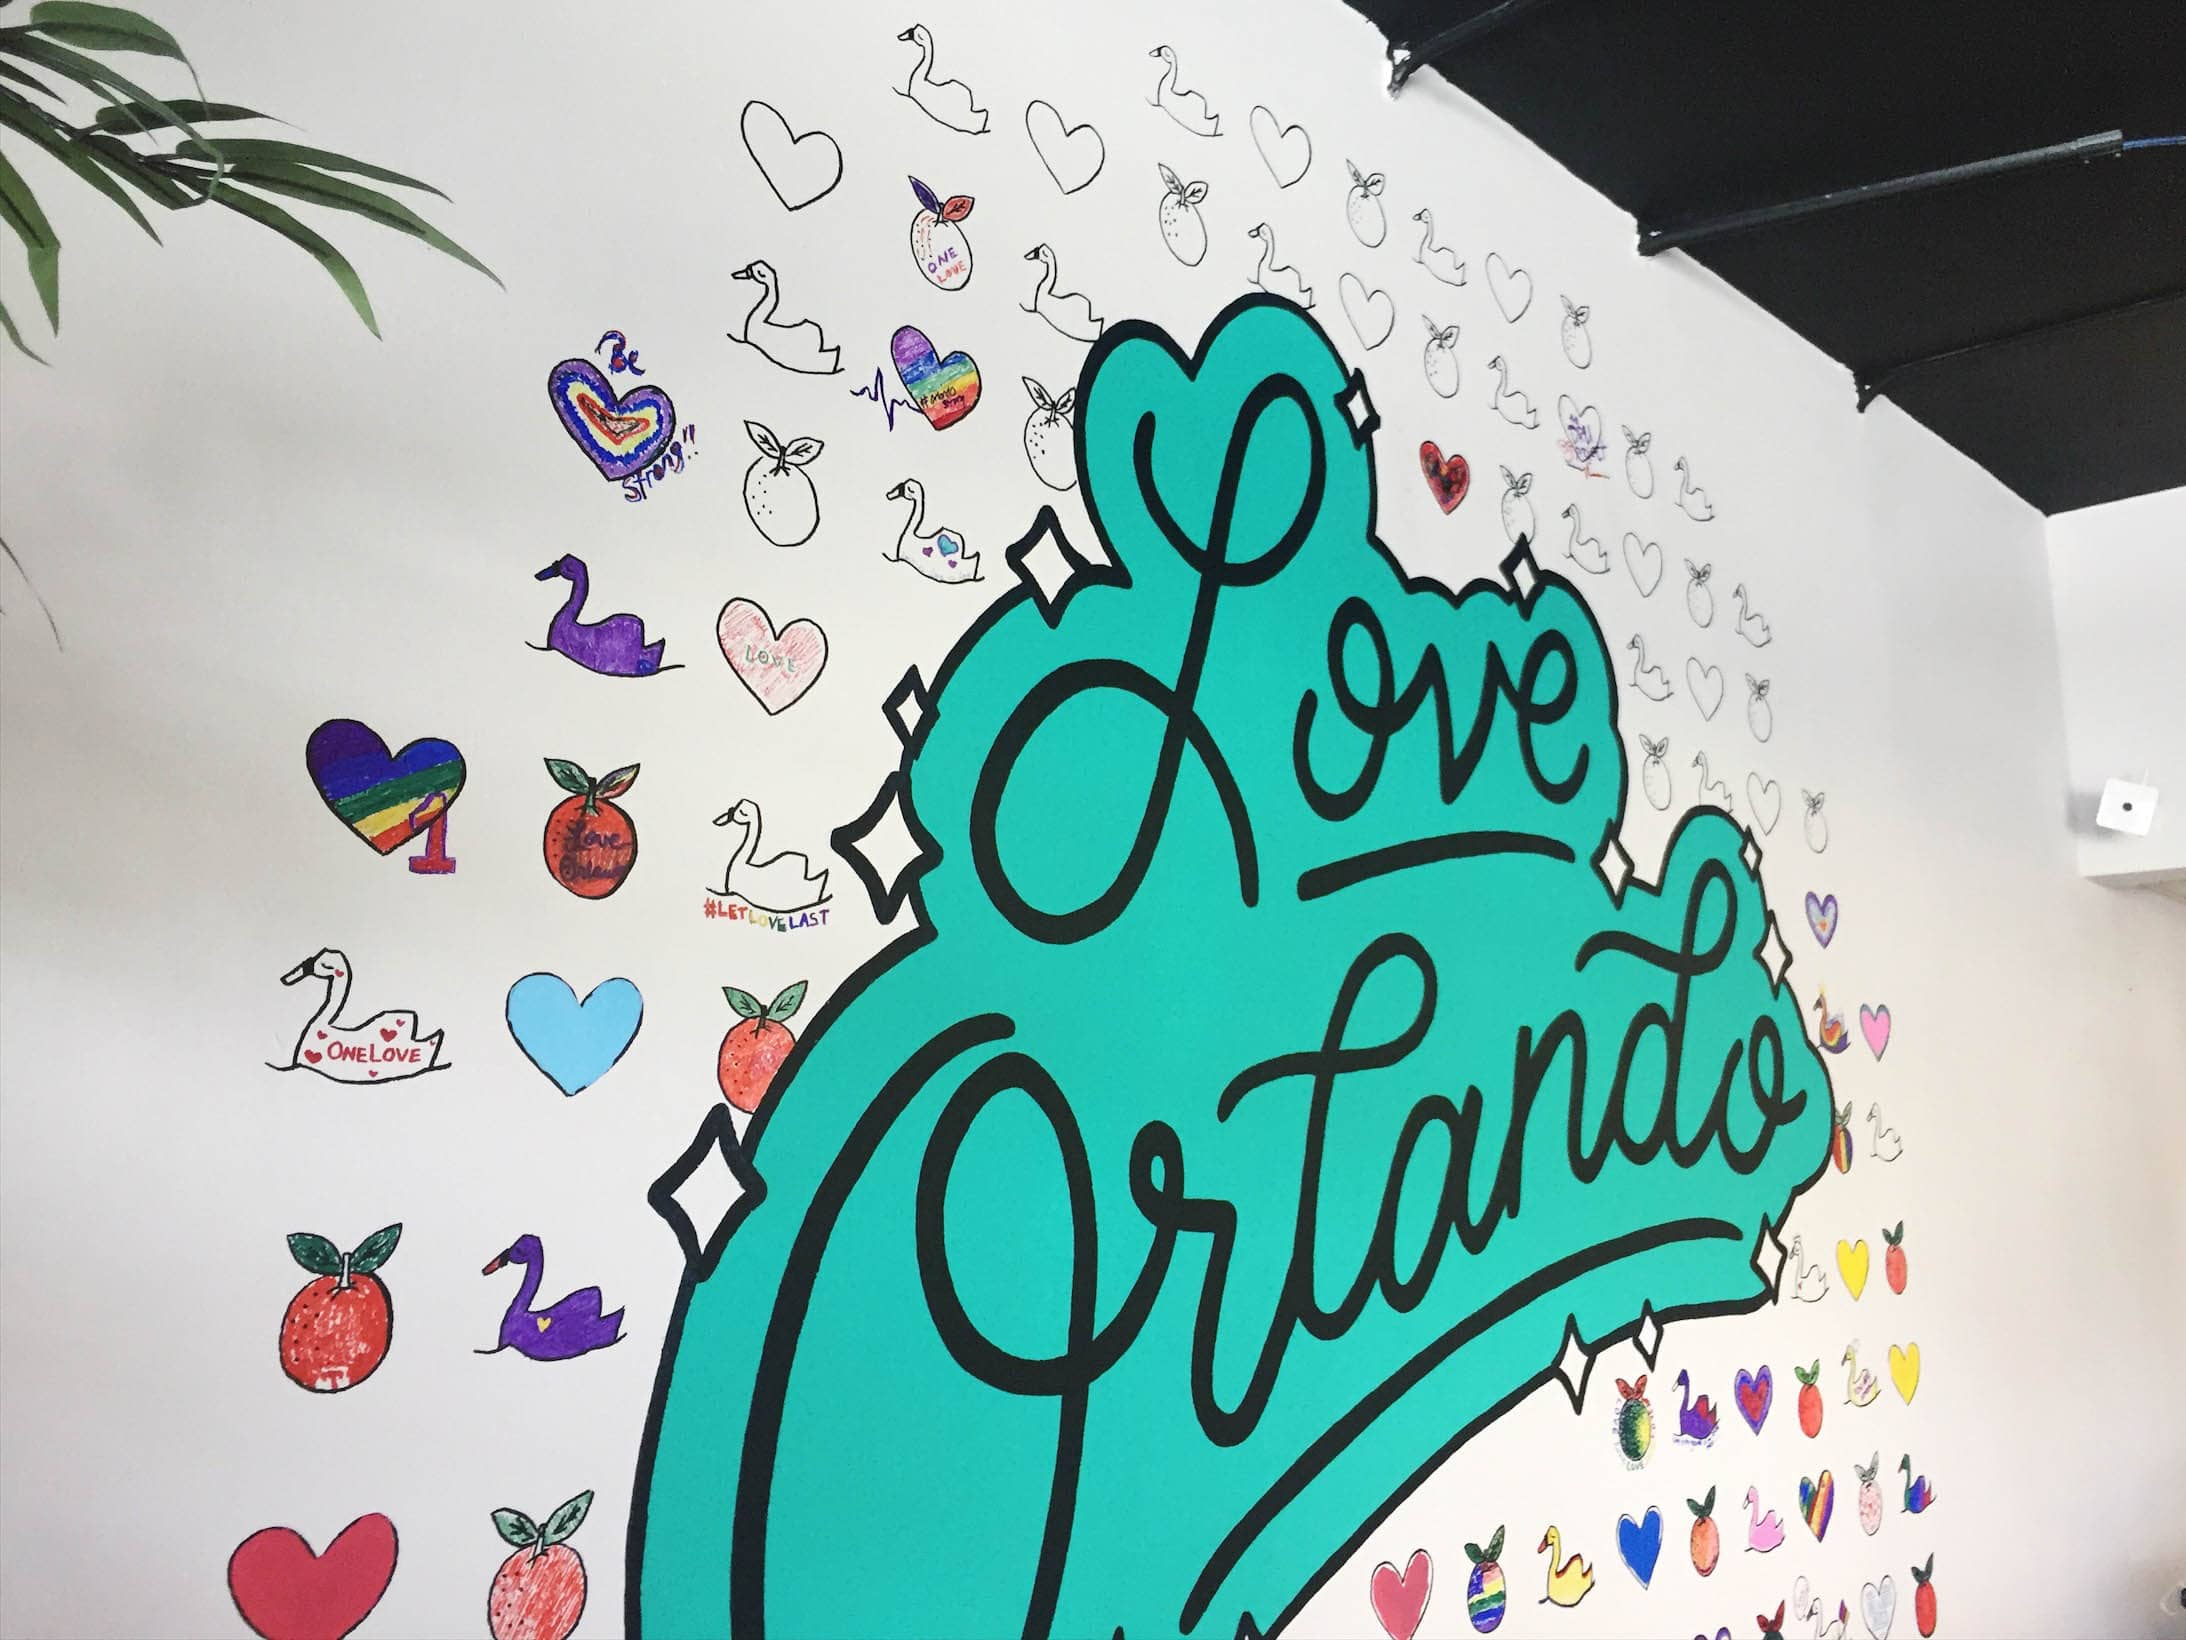 Love Orlando hand lettering by Hillery Powers mural at Orlando Shirts black teal turquoise blue rainbow